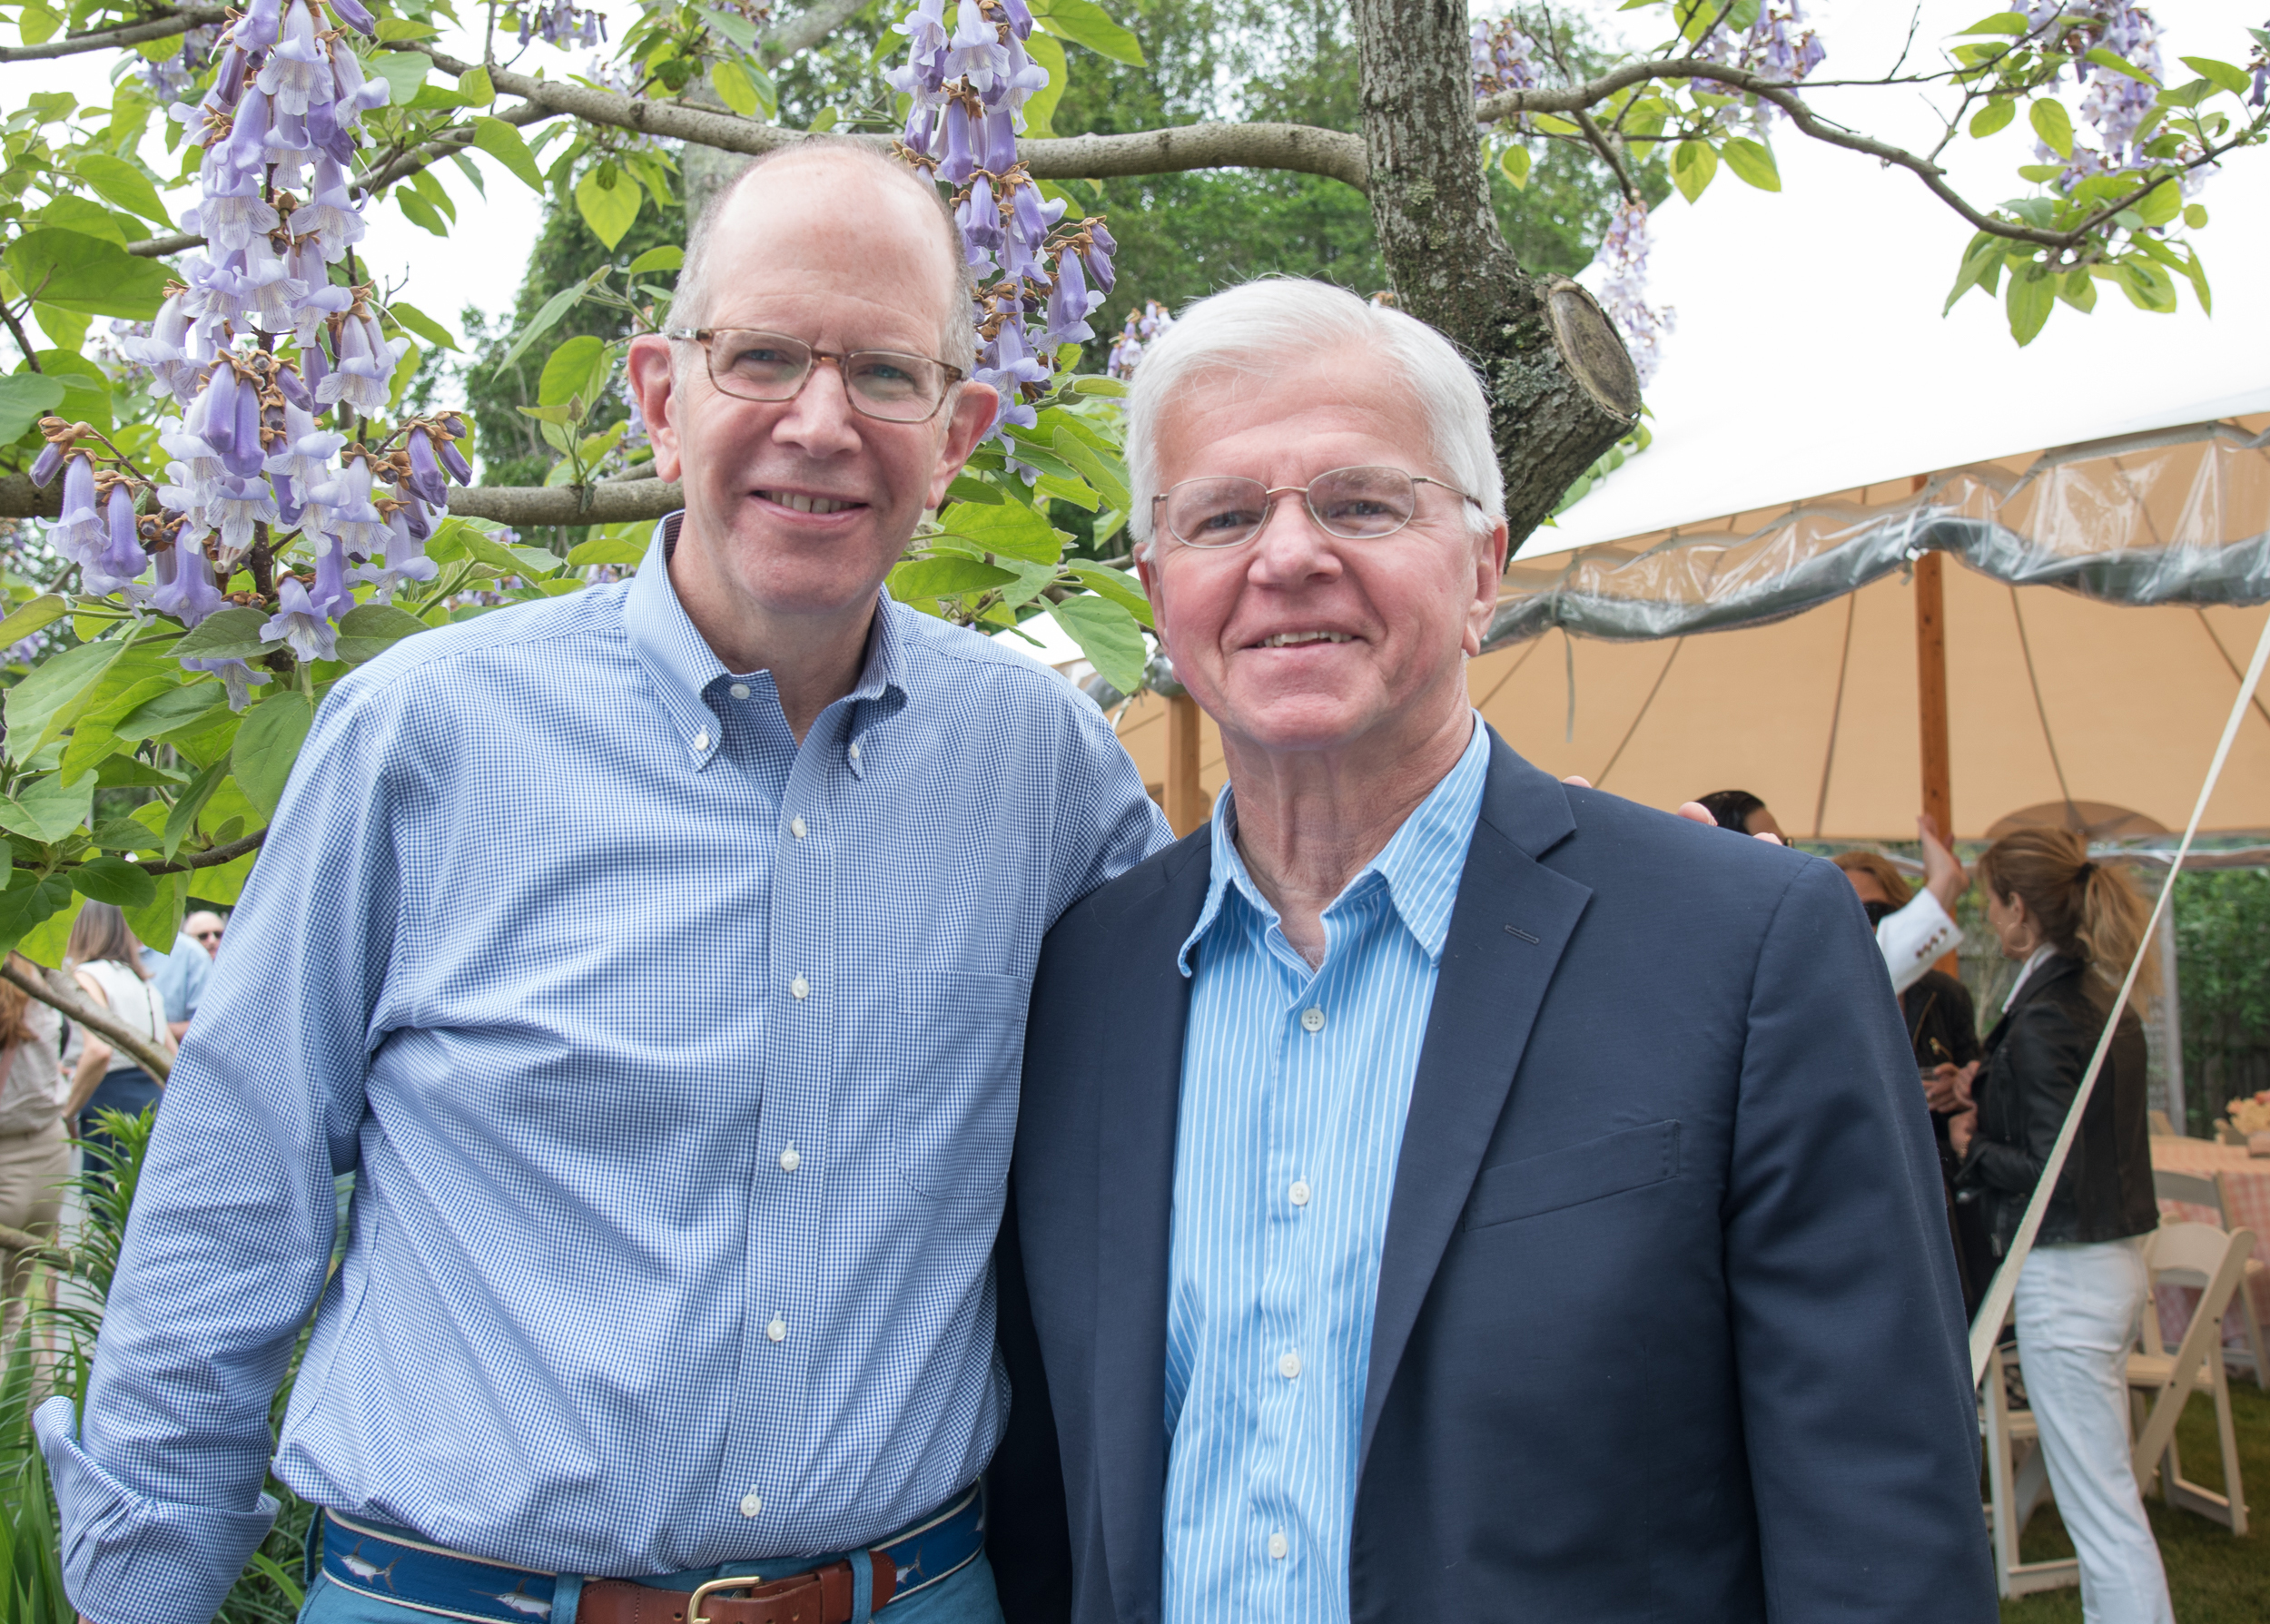 Robert Chaloner and Assemblyman Fred Thiele, Jr. at the annual Edie’s Backyard BBQ  on Saturday to benefit the Edie Windsor Healthcare  Center at Stony Brook Southampton Hospital.  LISA TAMBURINI